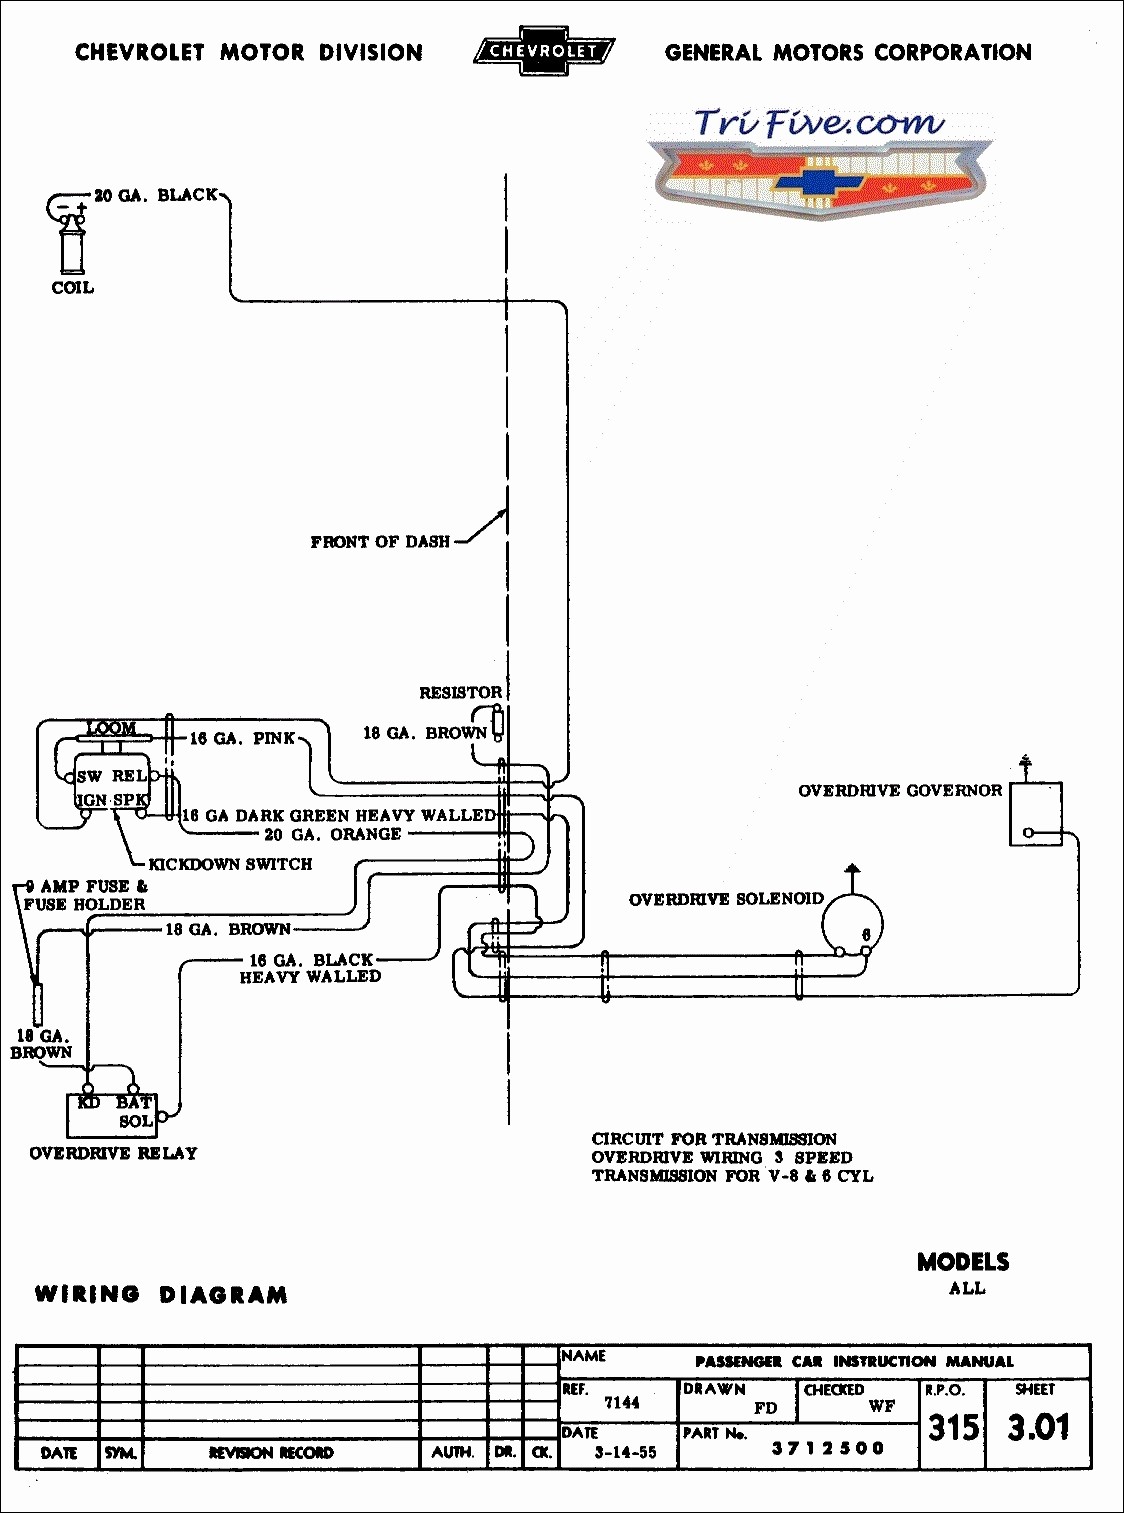 Full Size of Wiring Diagram Ford Starter Solenoid Wiring Diagram Fresh 1955 Chevy Ignition Switch